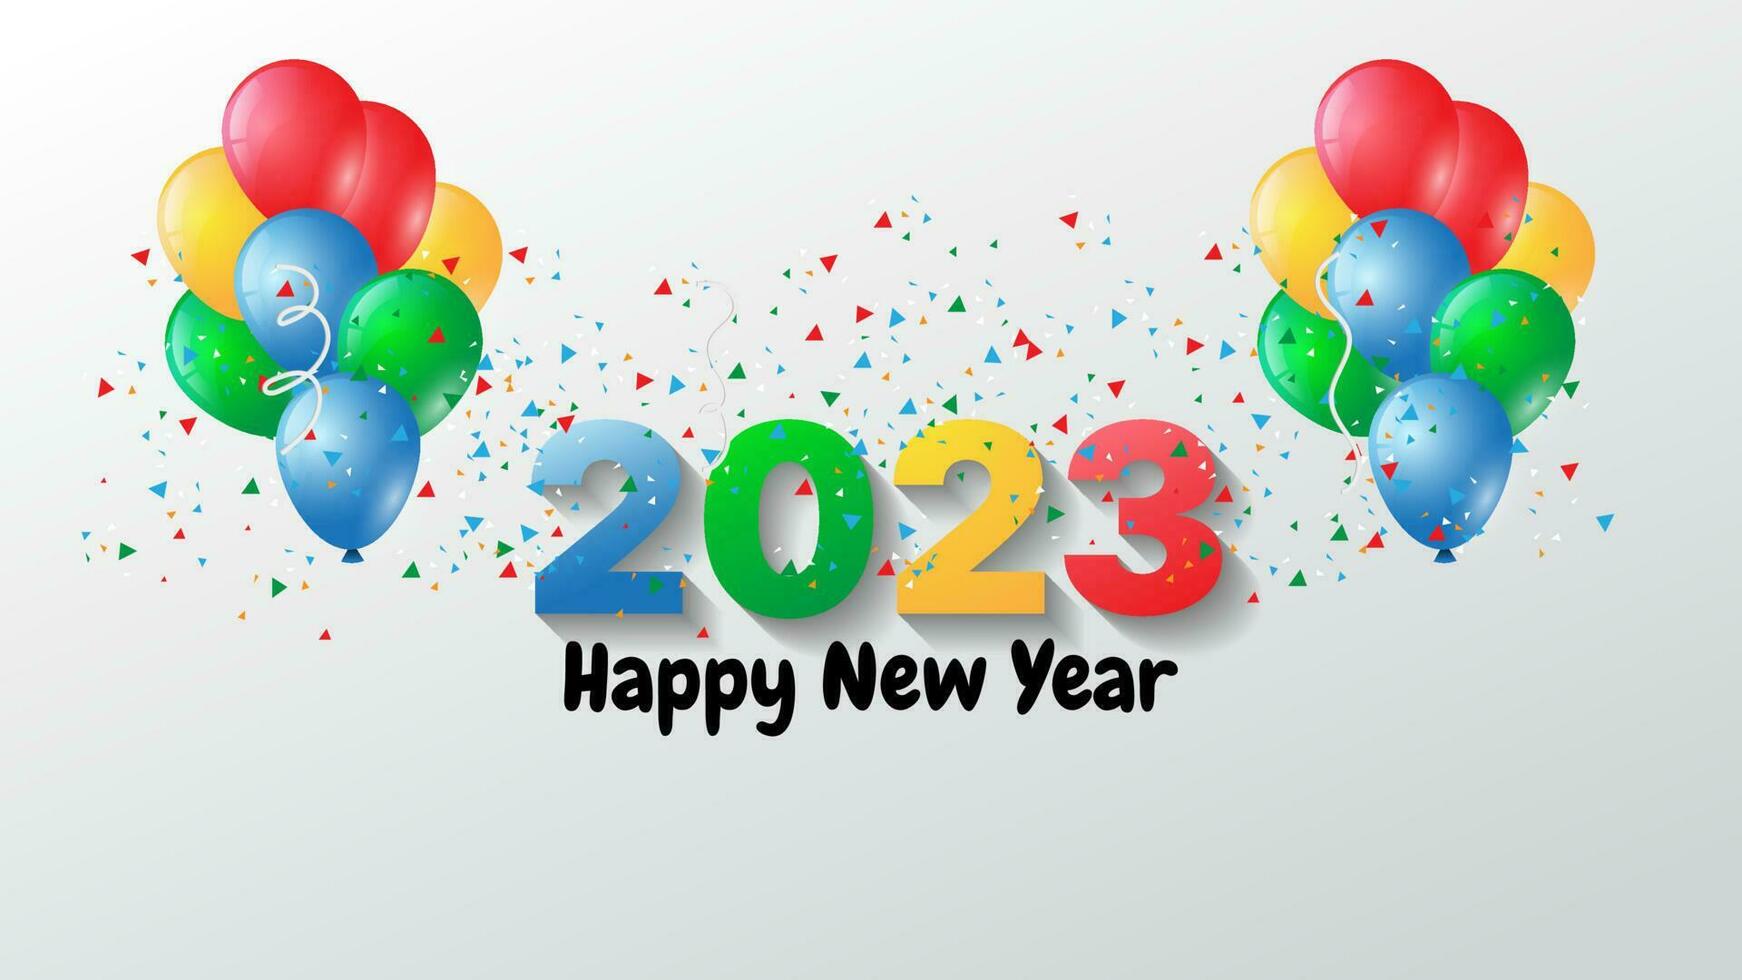 colorful happy new year background with balloons and confetti. vector illustration